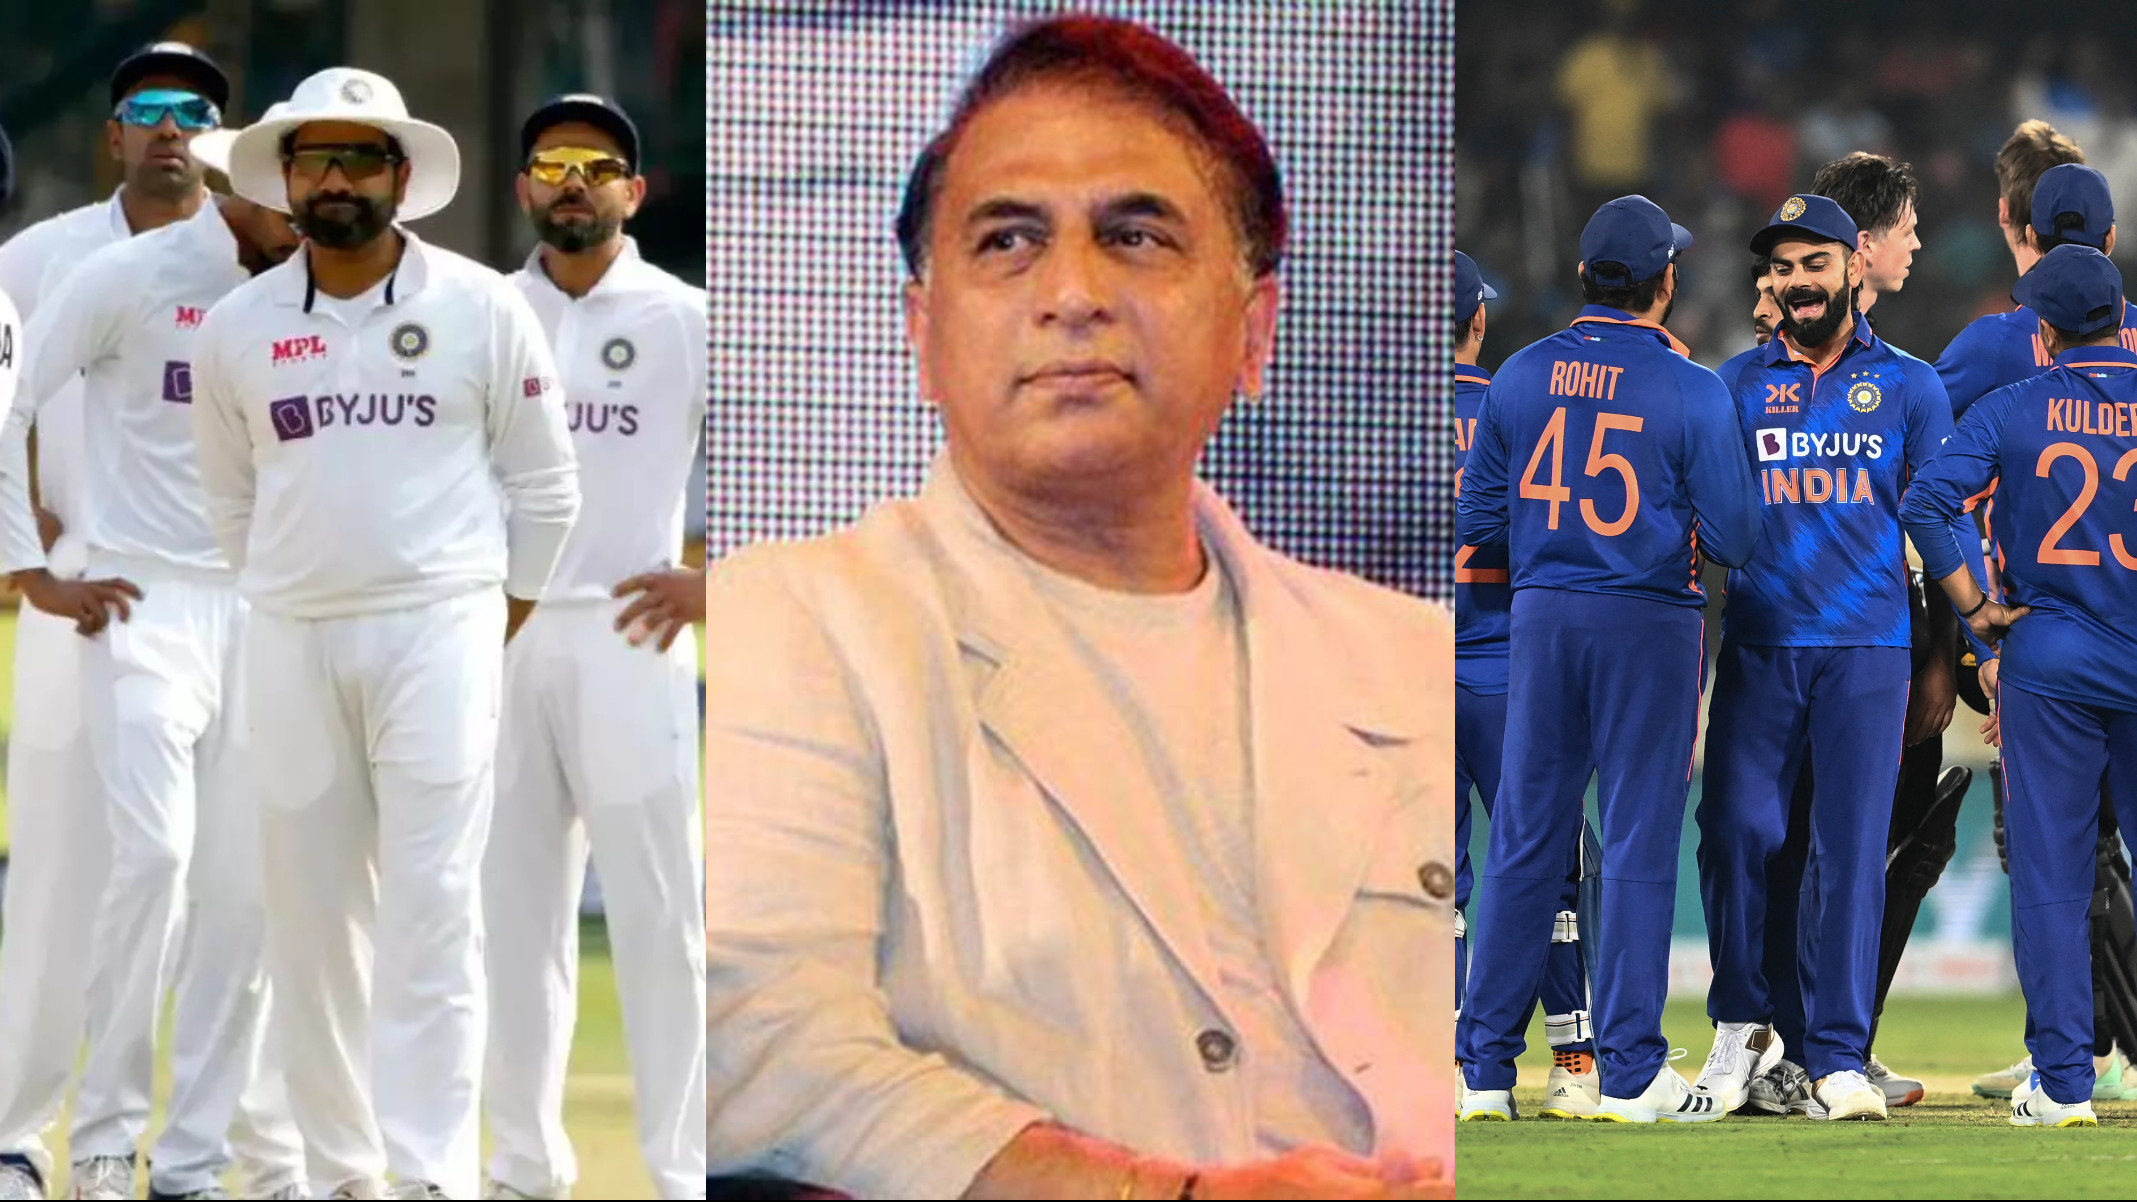 Sunil Gavaskar says he wants India to win both the ICC World Test Championship and ODI World Cup this year